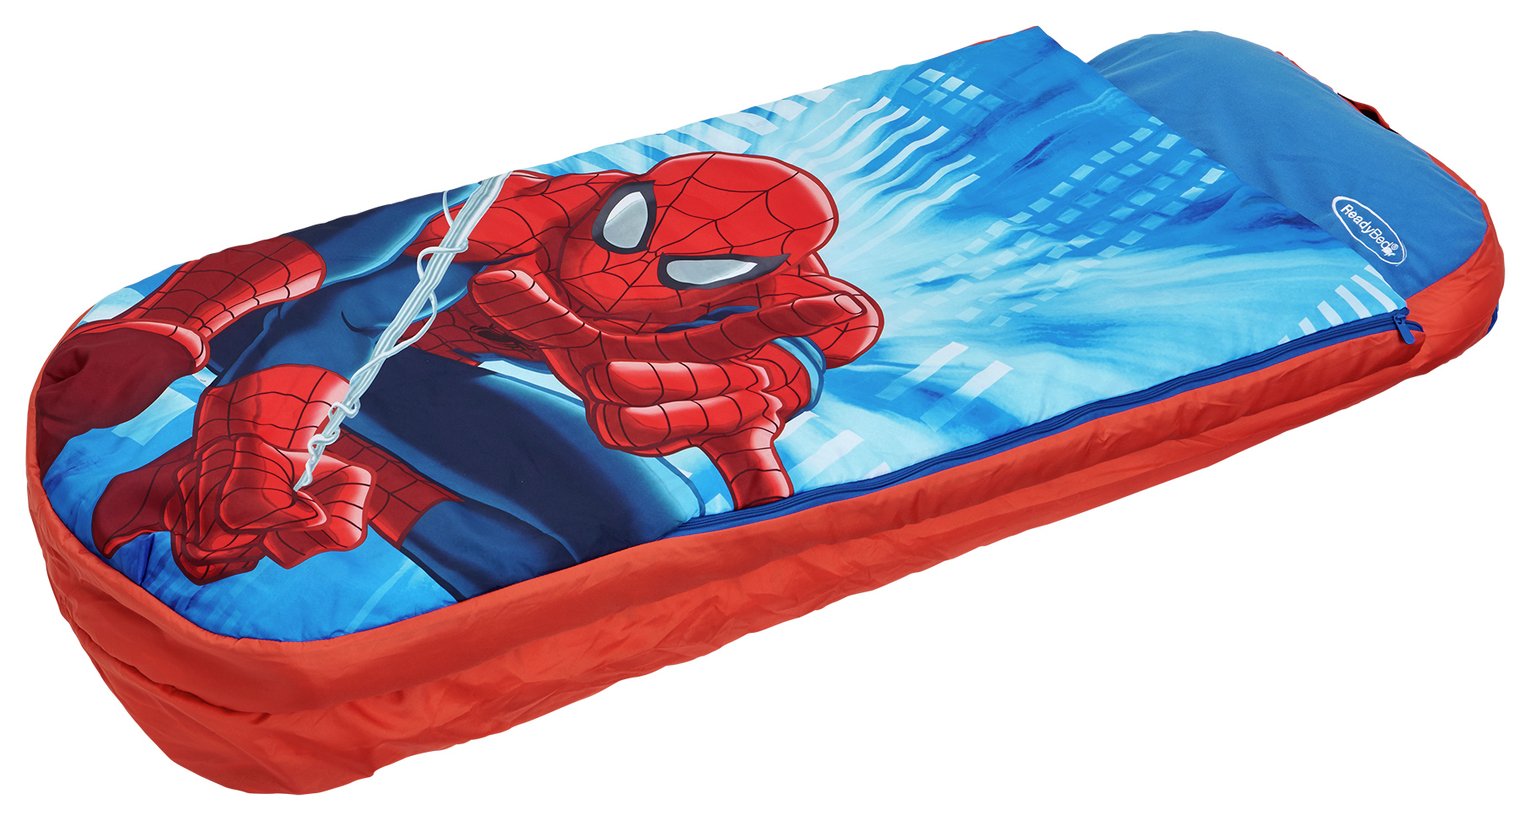 Spider-Man Junior ReadyBed Air Bed and Sleeping Bag